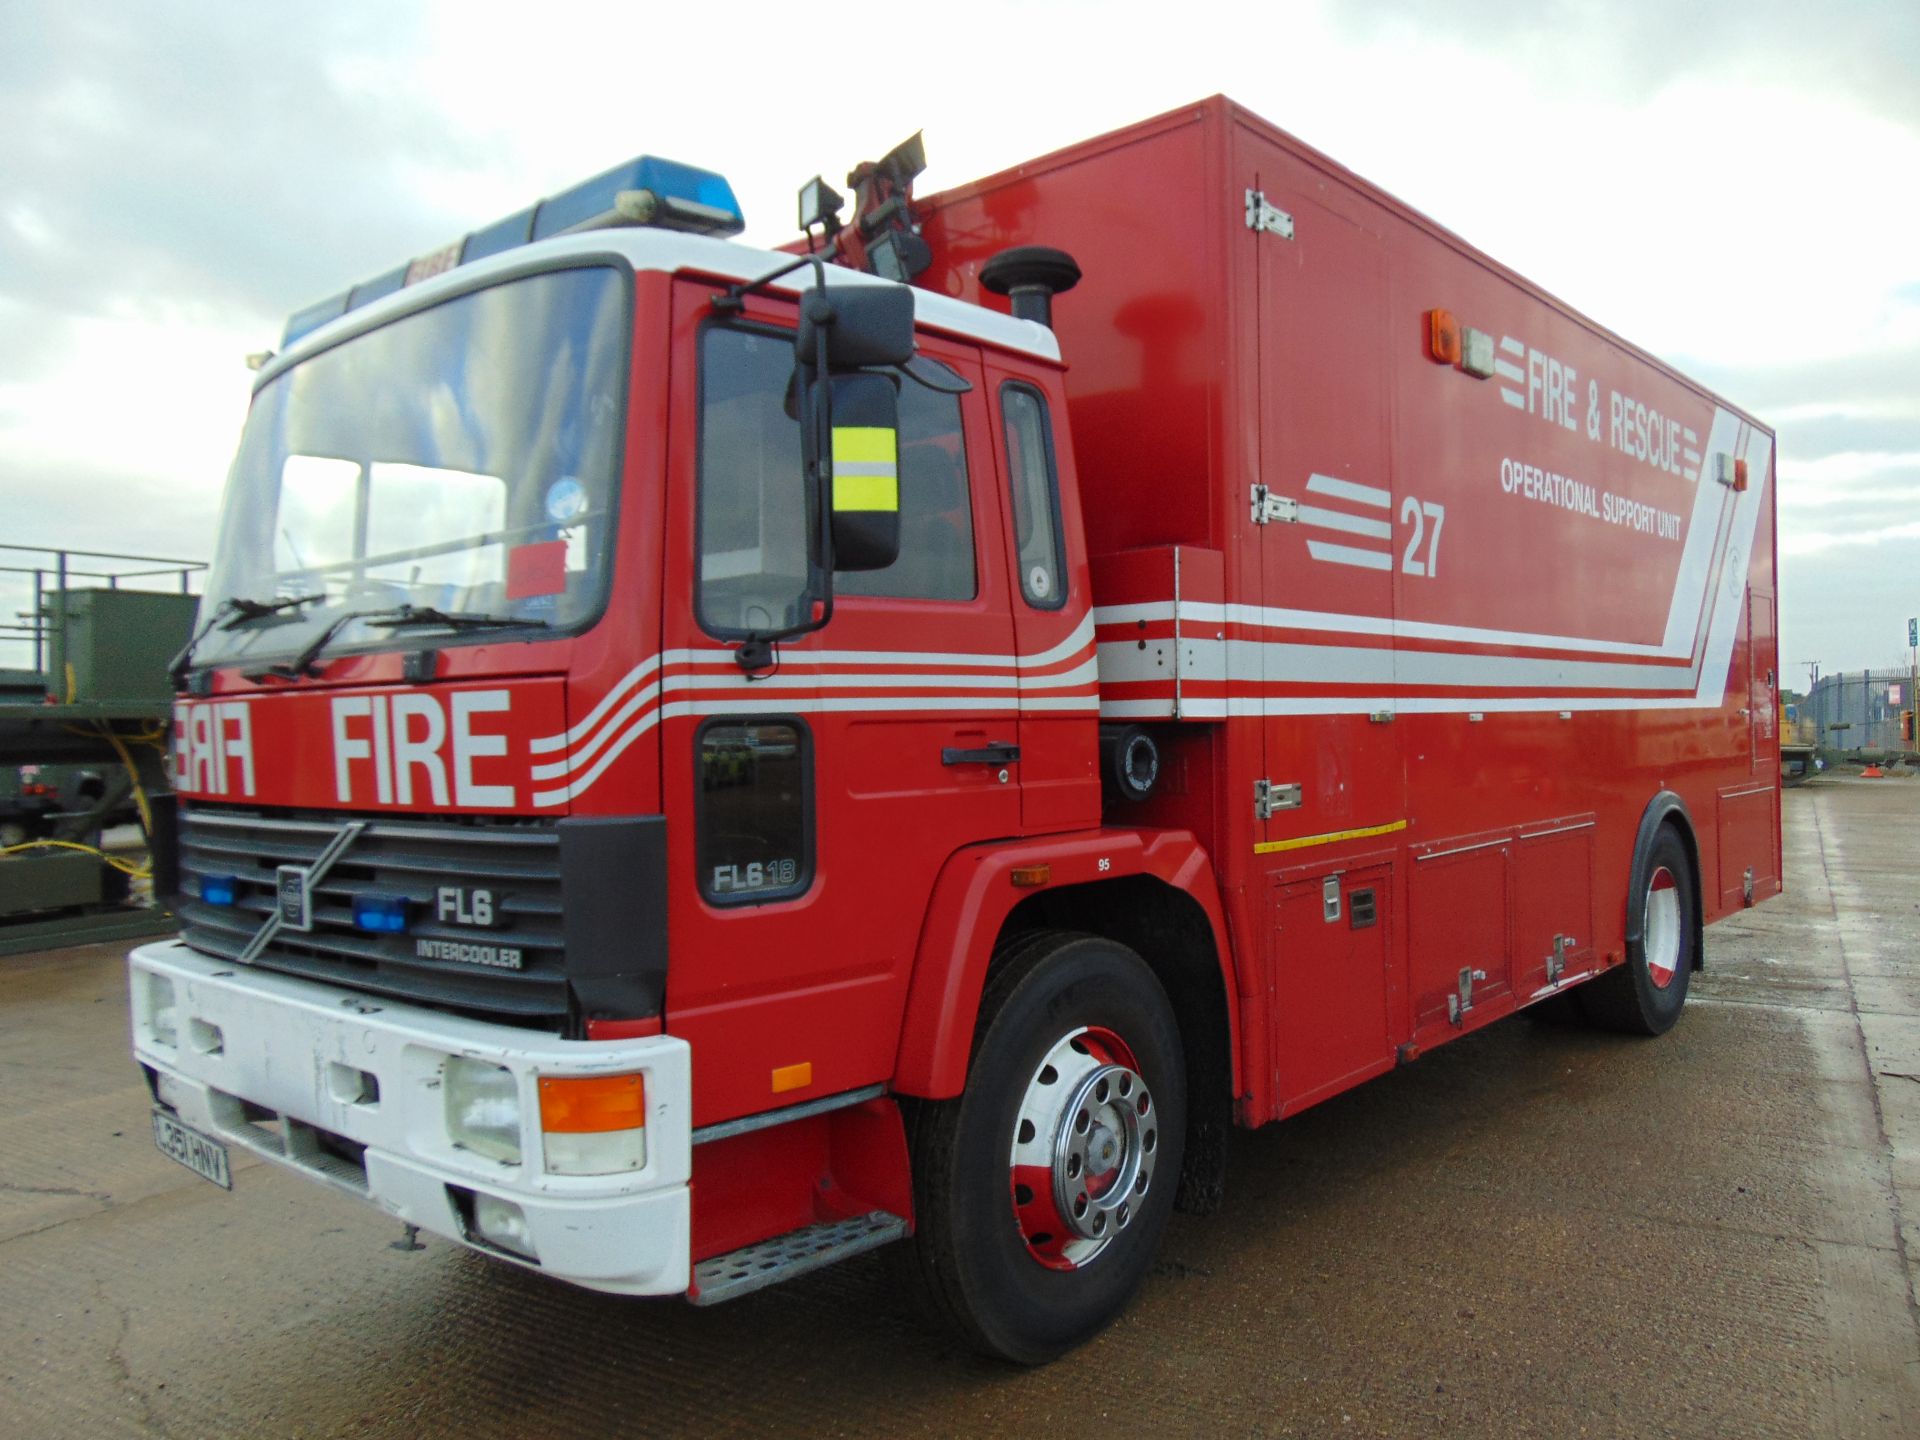 1993 Volvo FL6 18 4 x 2 Incident Response Unit complete with a 1000 Kg Tail Lift - Image 3 of 37